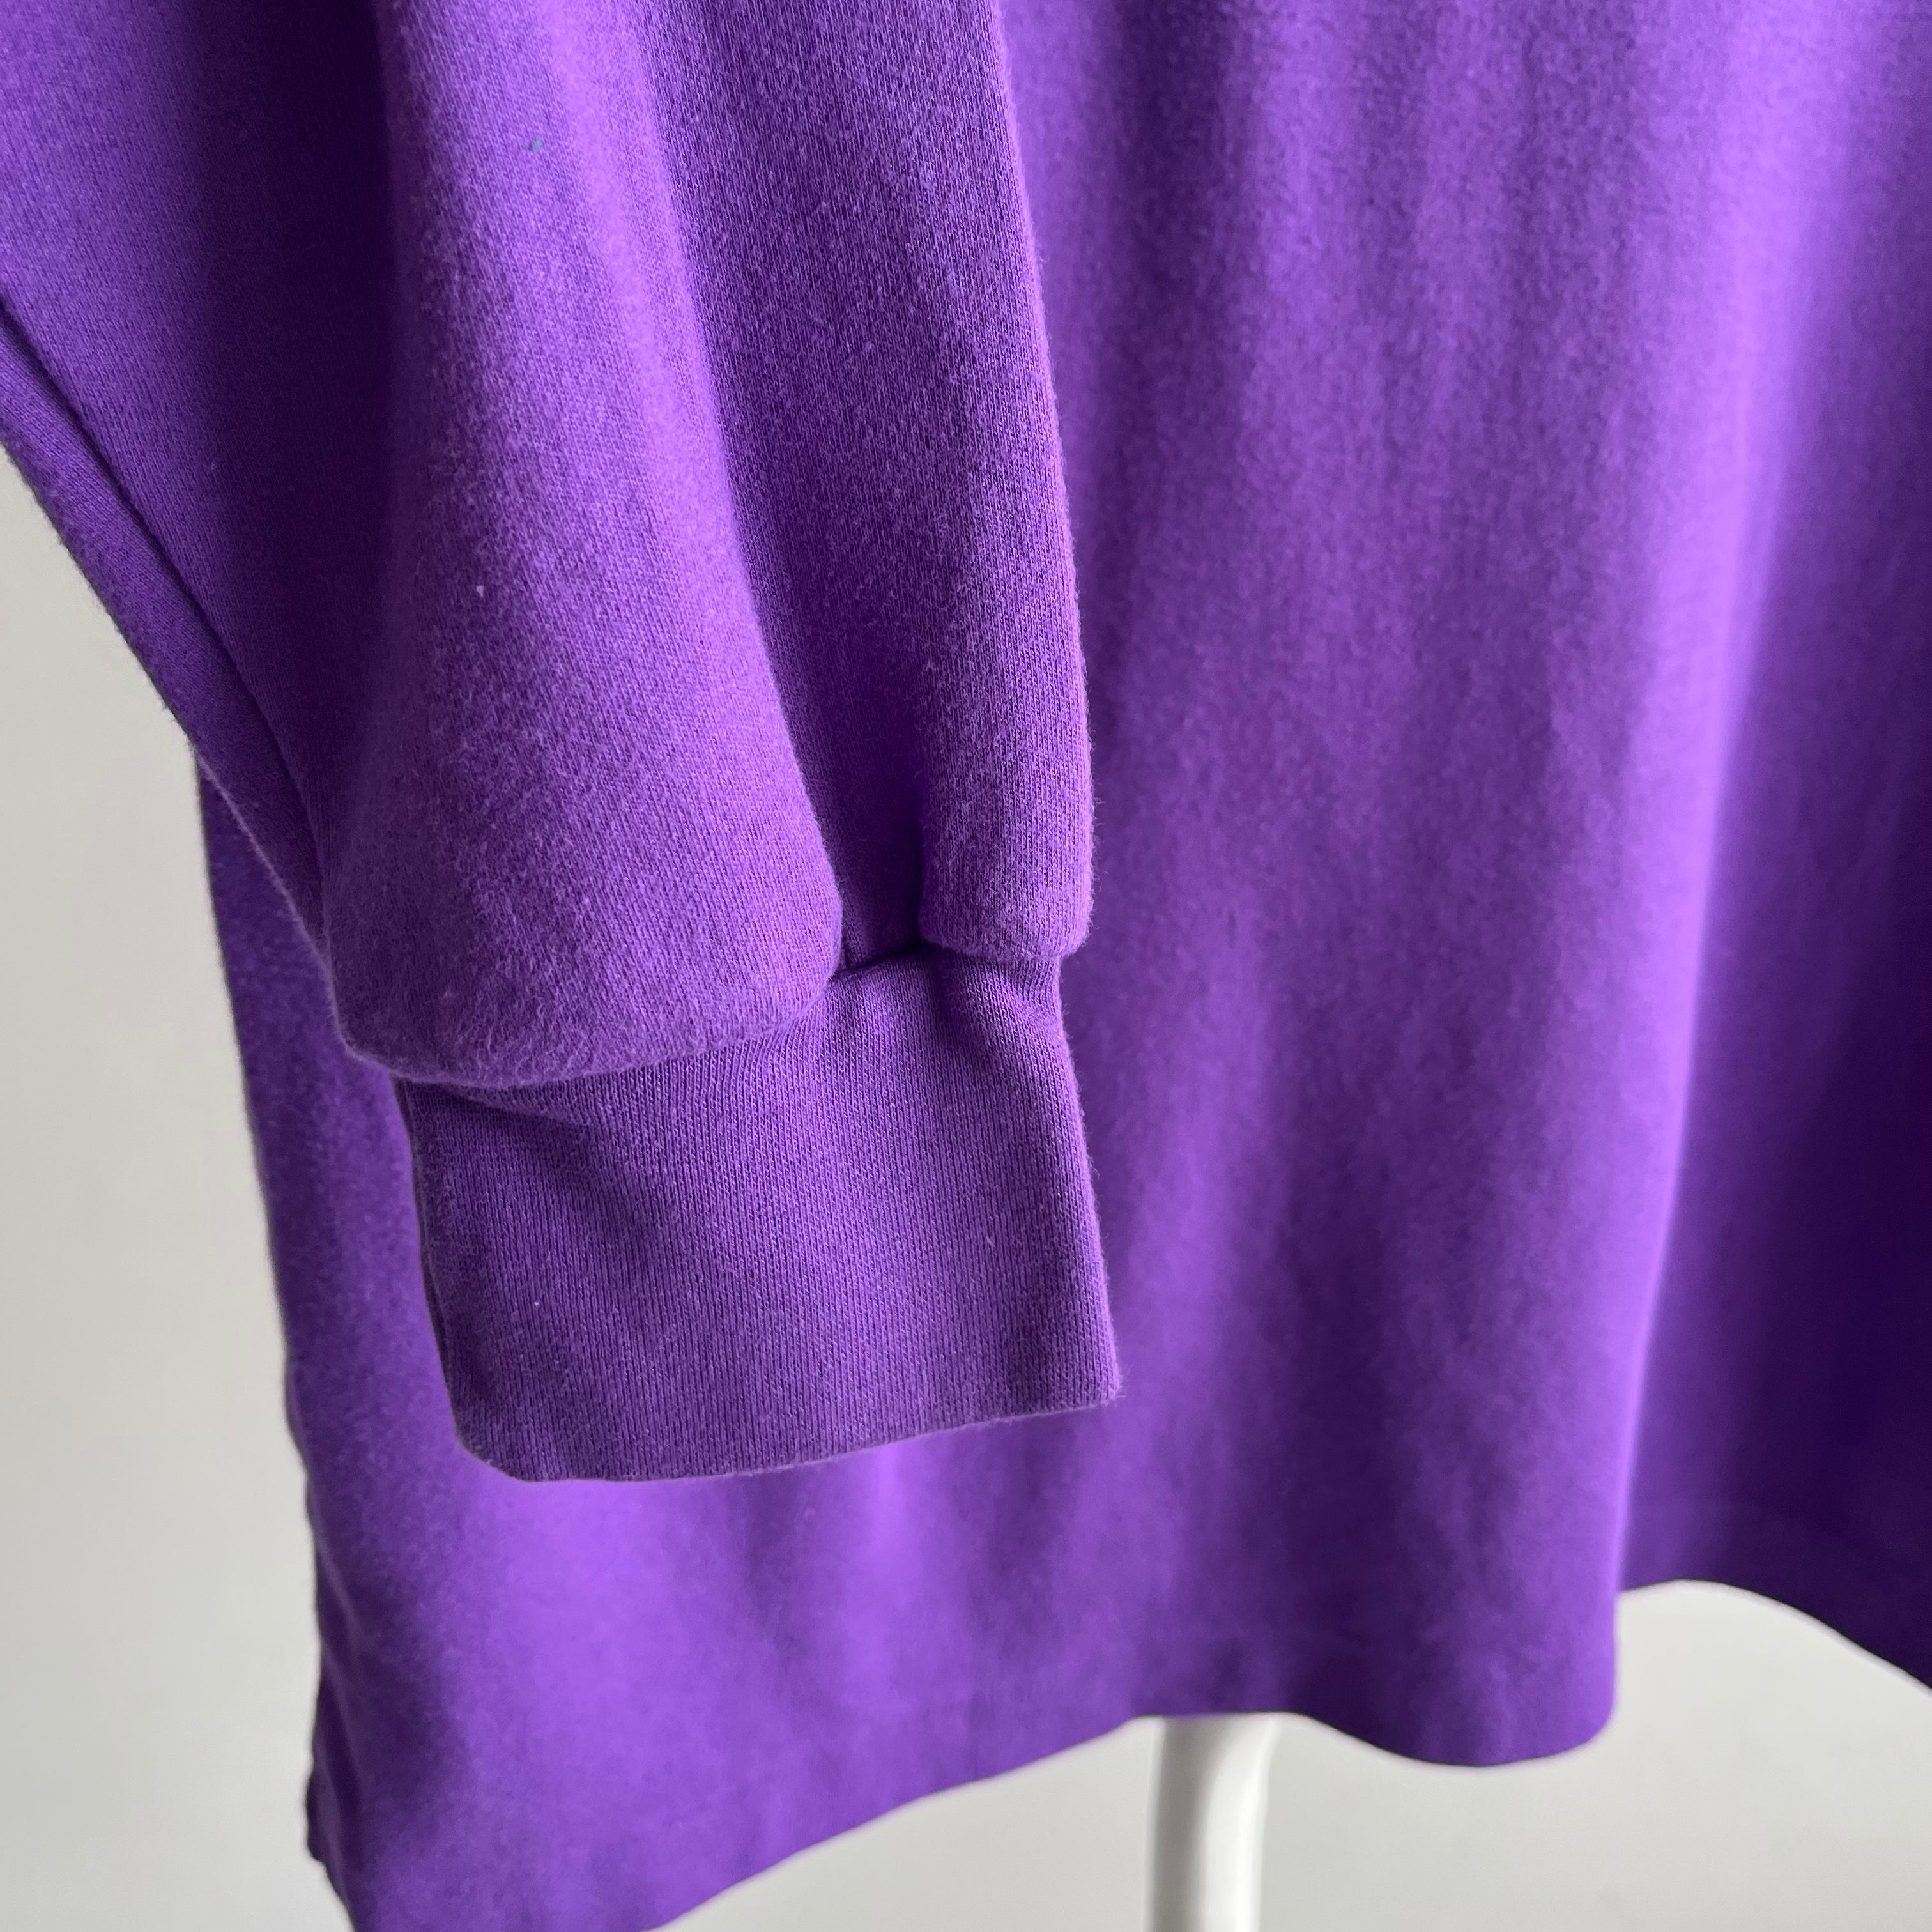 1990s Lord And Taylor Jersey Mock Neck Long Sleeve Purple Shirt